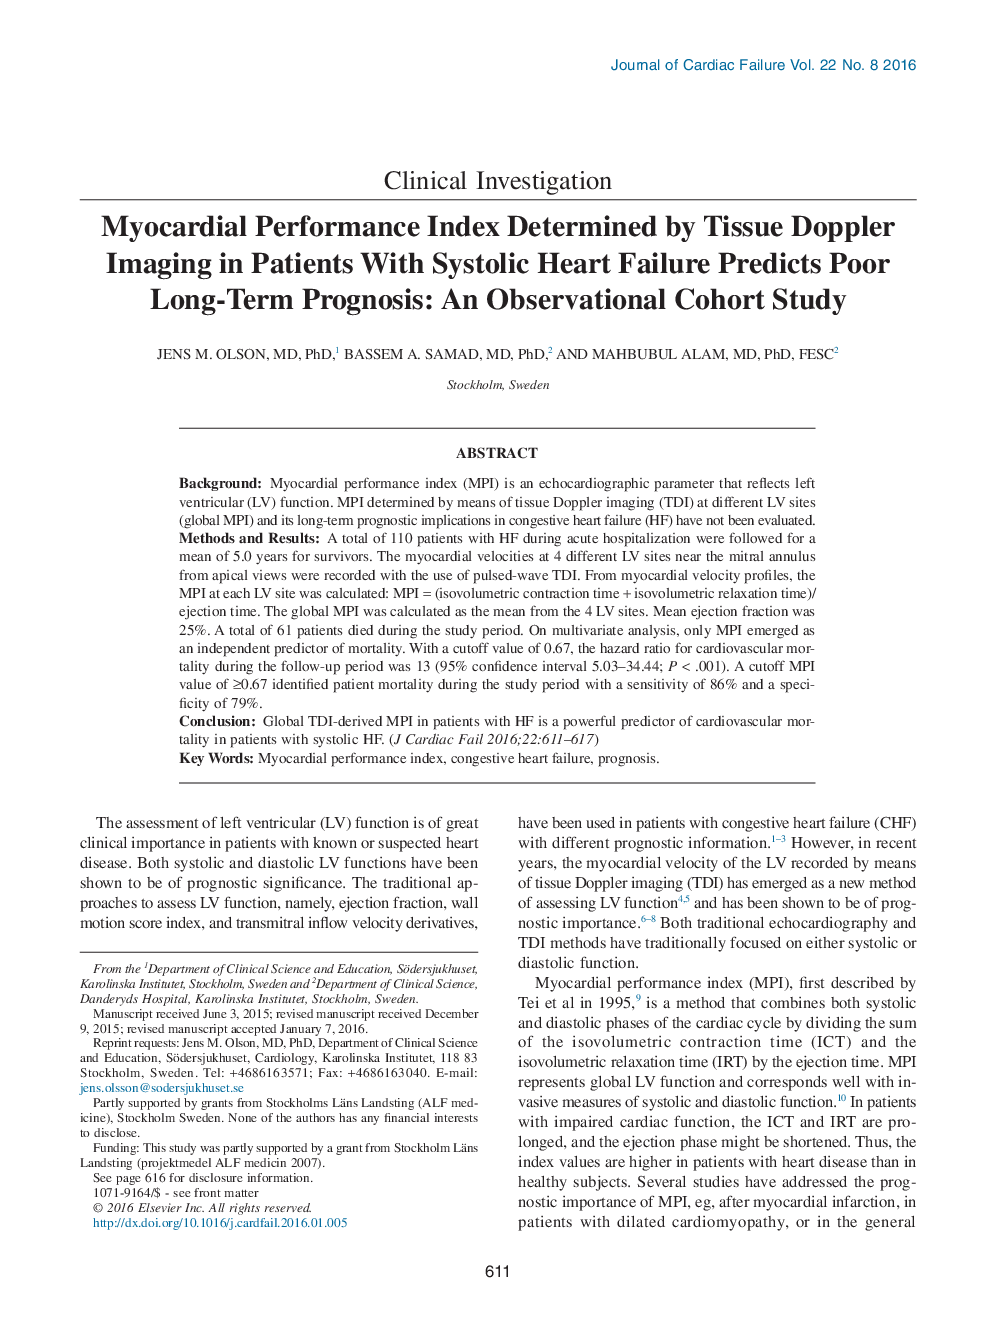 Myocardial Performance Index Determined by Tissue Doppler Imaging in Patients With Systolic Heart Failure Predicts Poor Long-Term Prognosis: An Observational Cohort Study